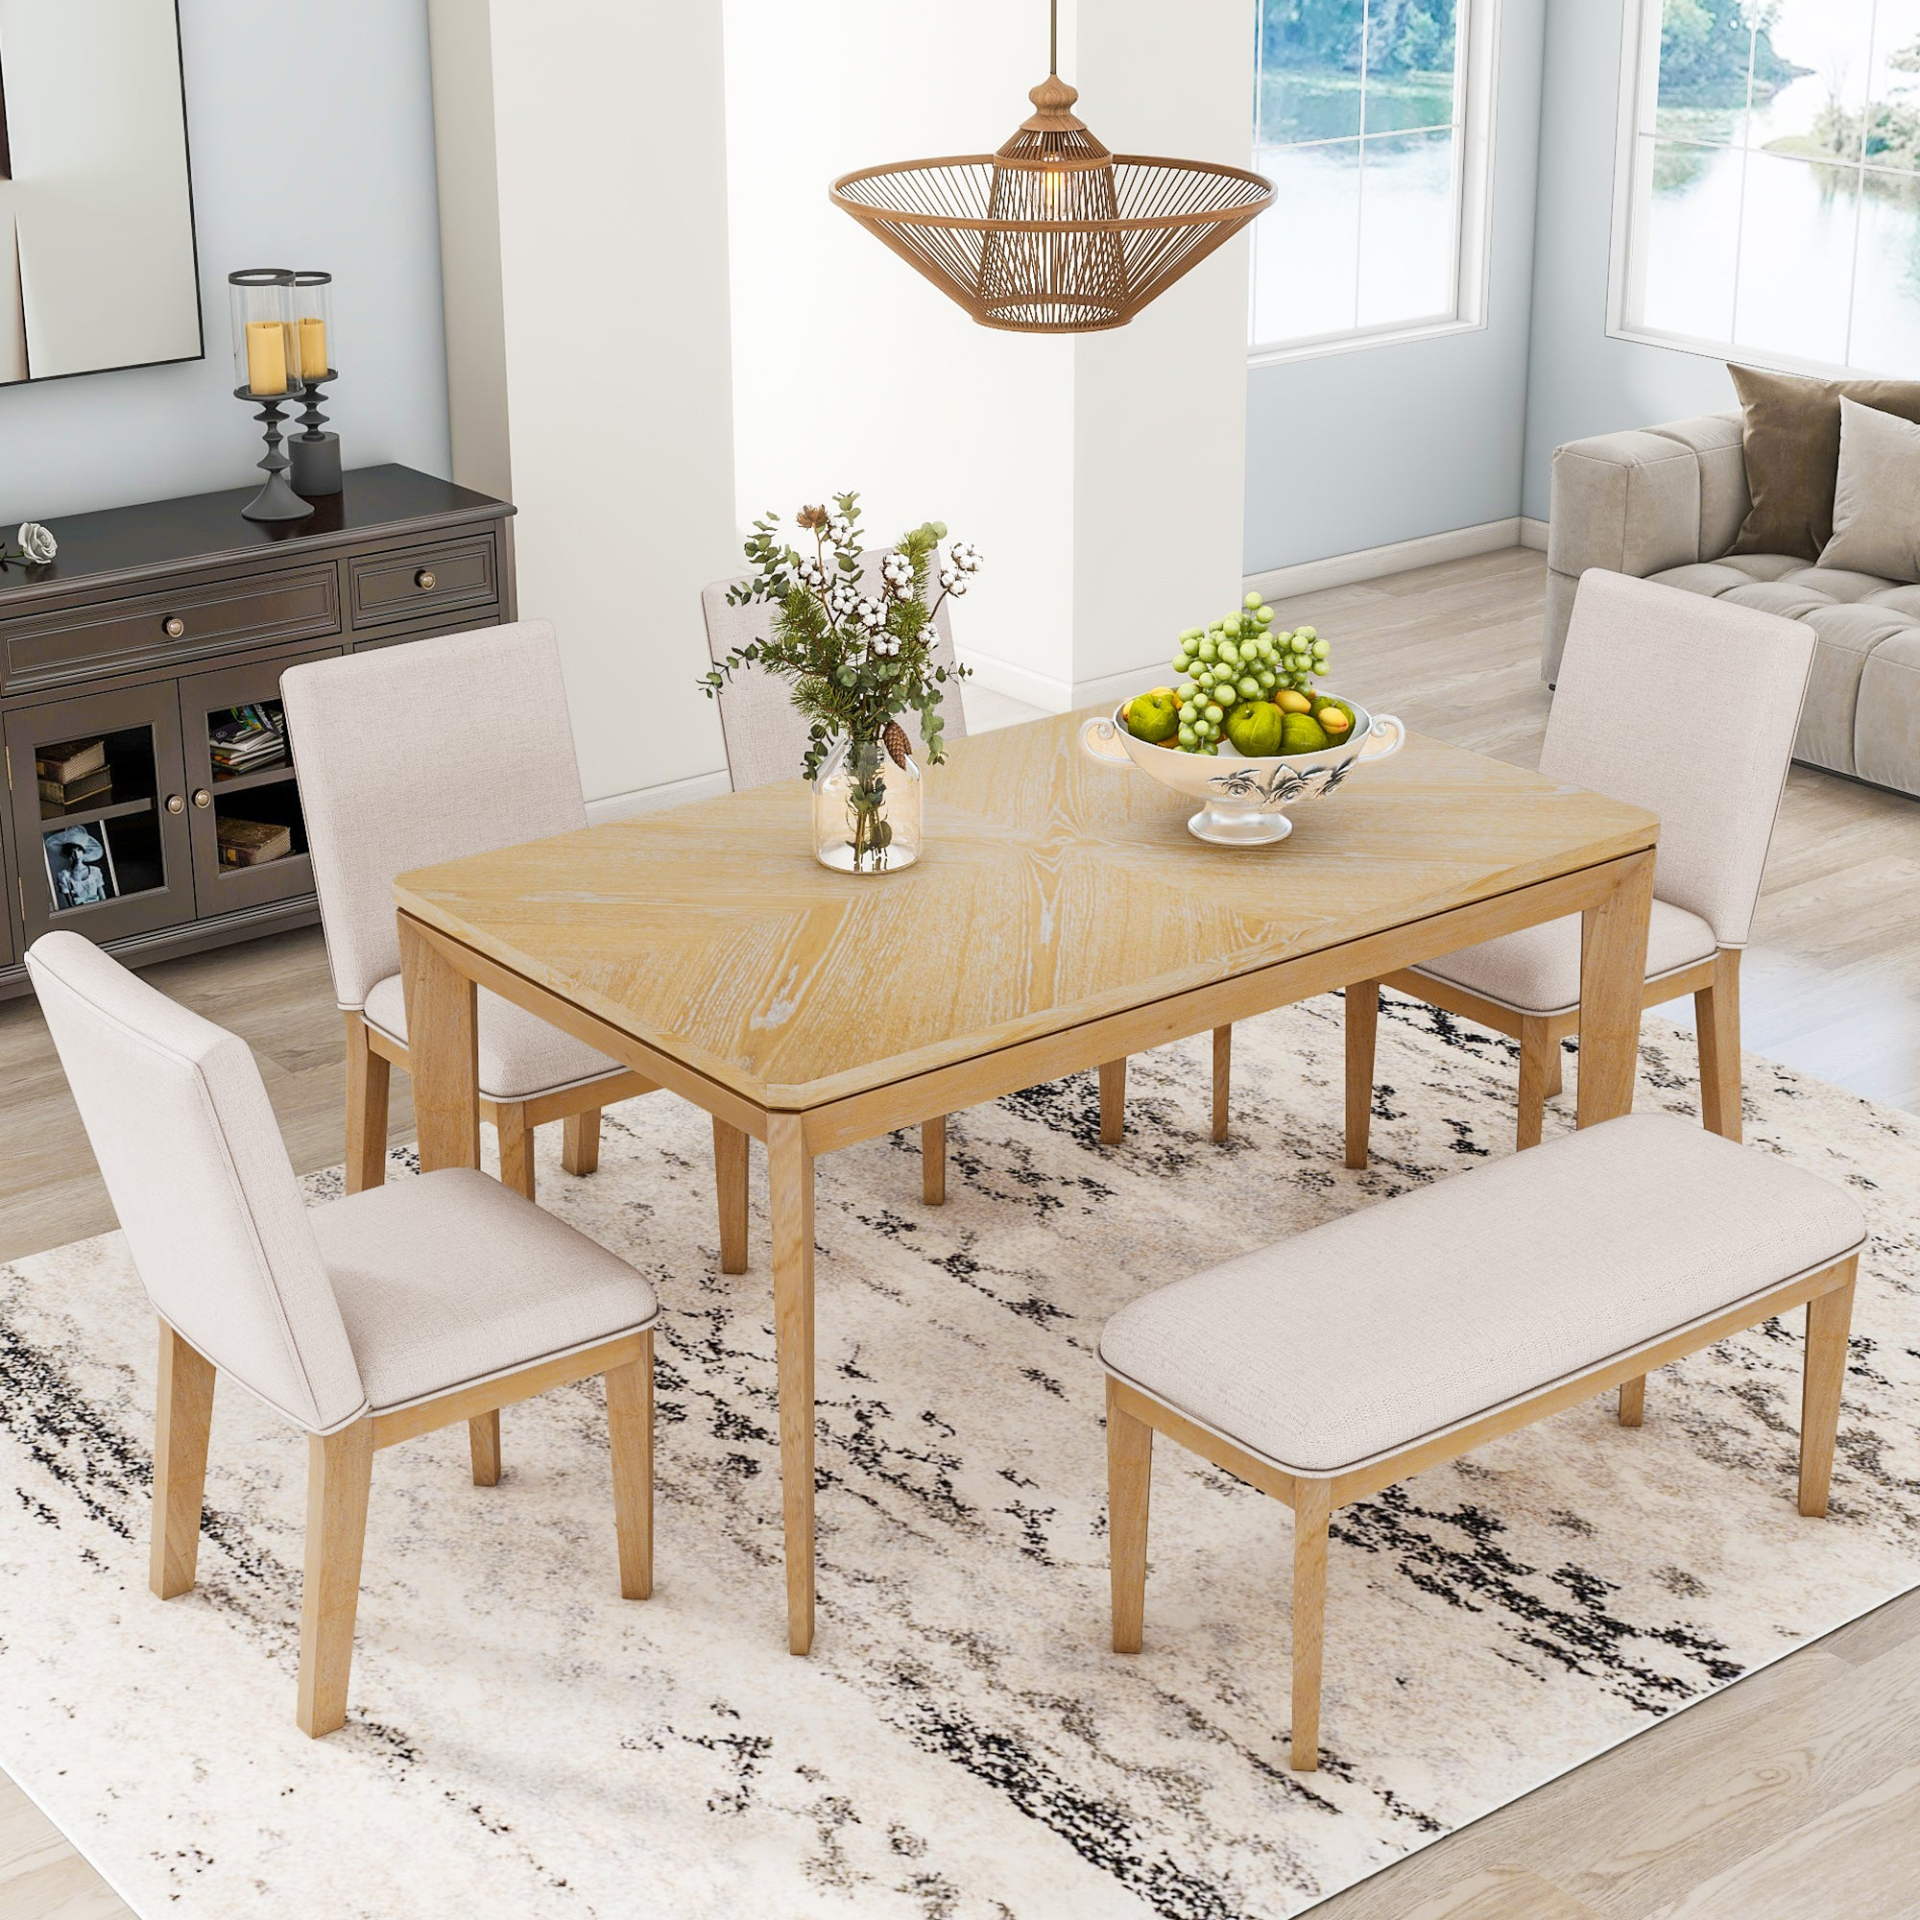 6-Piece Dining Table Set with Upholstered Dining Chairs and Bench,Farmhouse Style, Tapered Legs, Natural+Beige Môdern Space Gallery